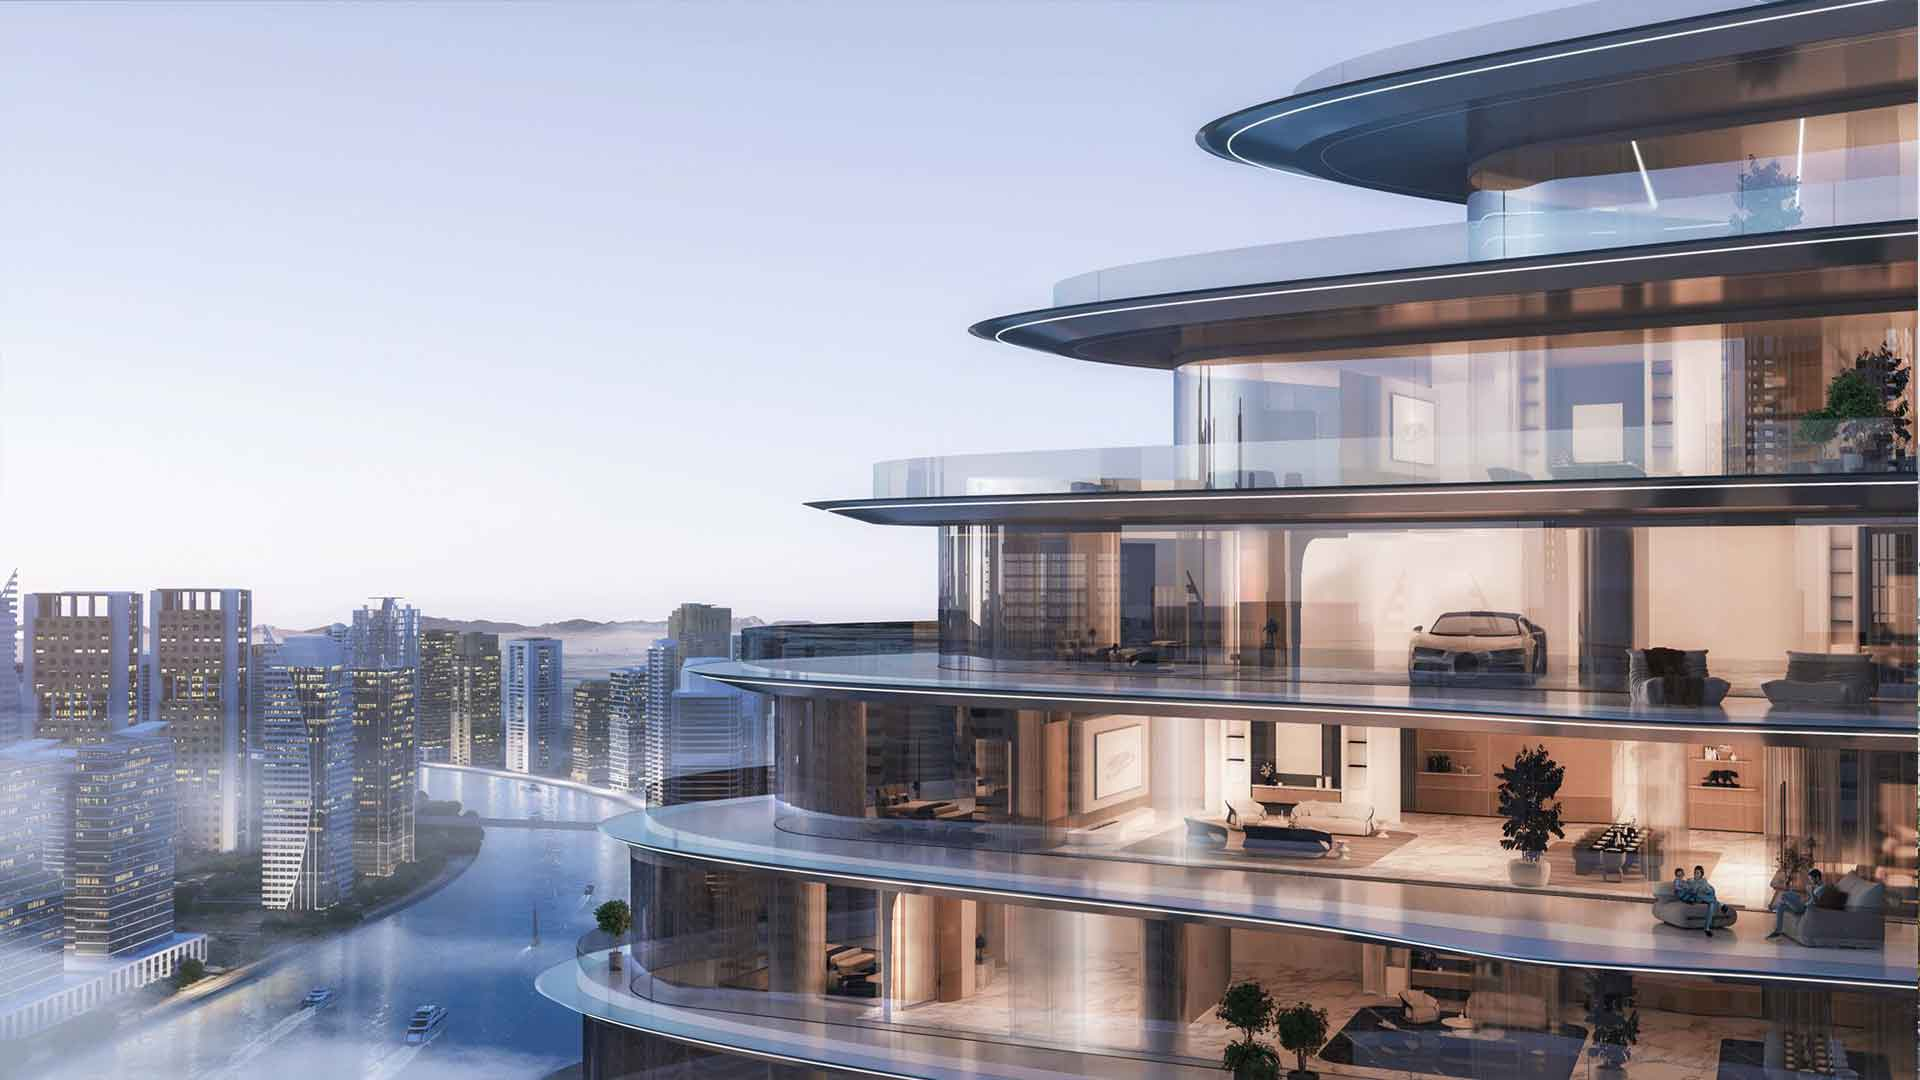 Bugatti Residences where penthouses in Dubai are available for sale